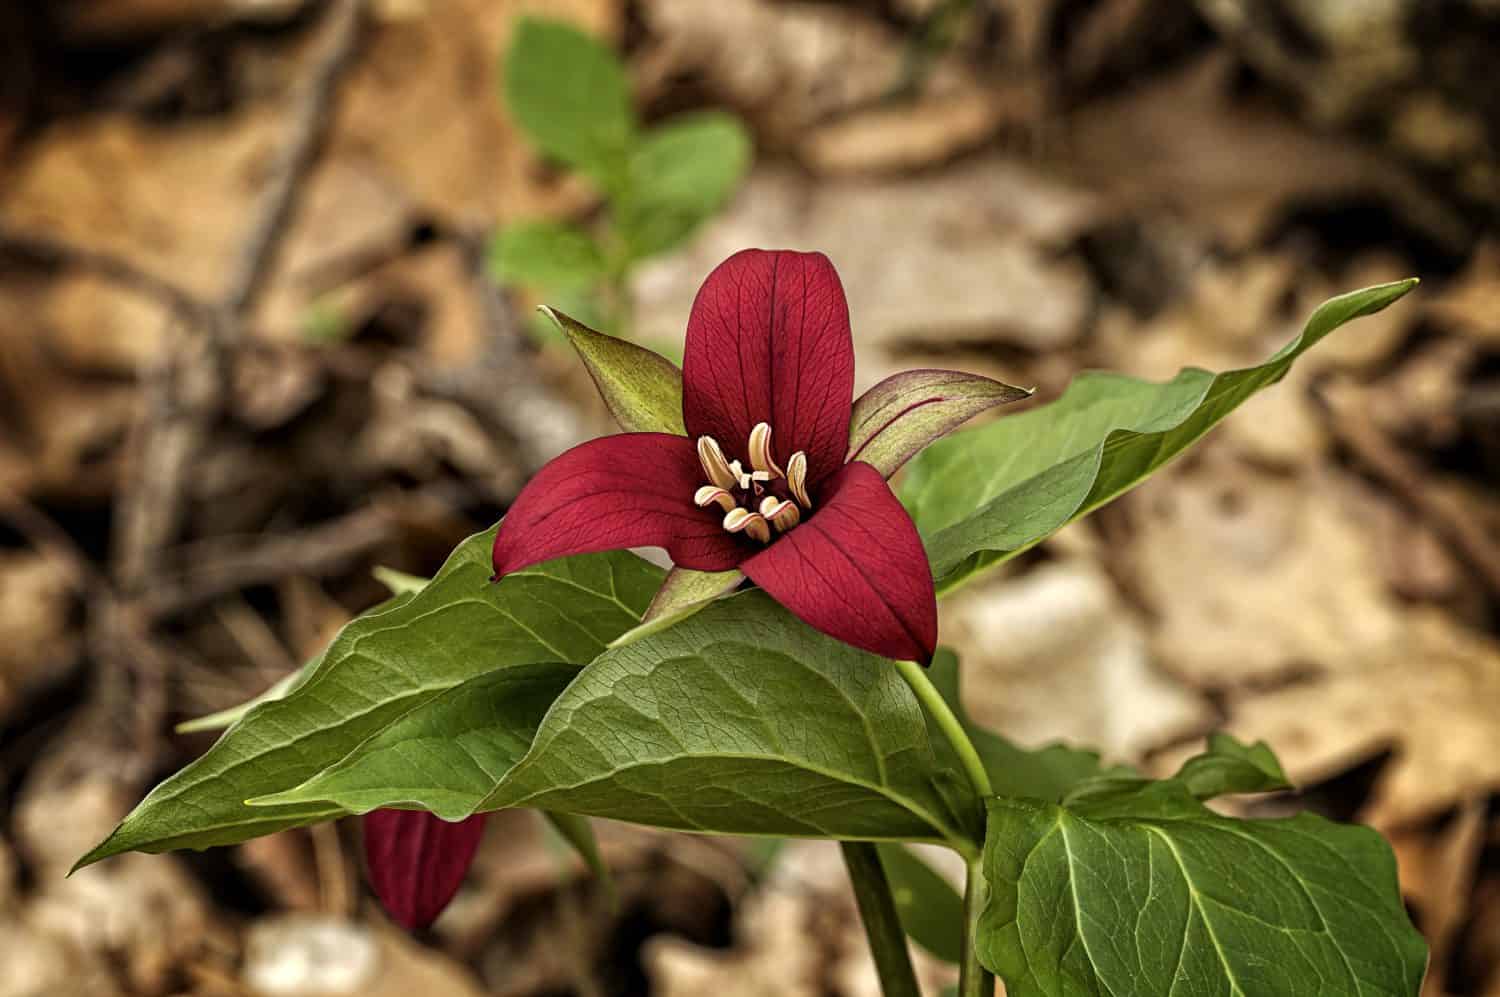 "A Rare Red Trillium" A beautiful red Trillium spotted while hiking near Toronto in early May. This was one of only three Reds among thousands of the much more common White Trillium.